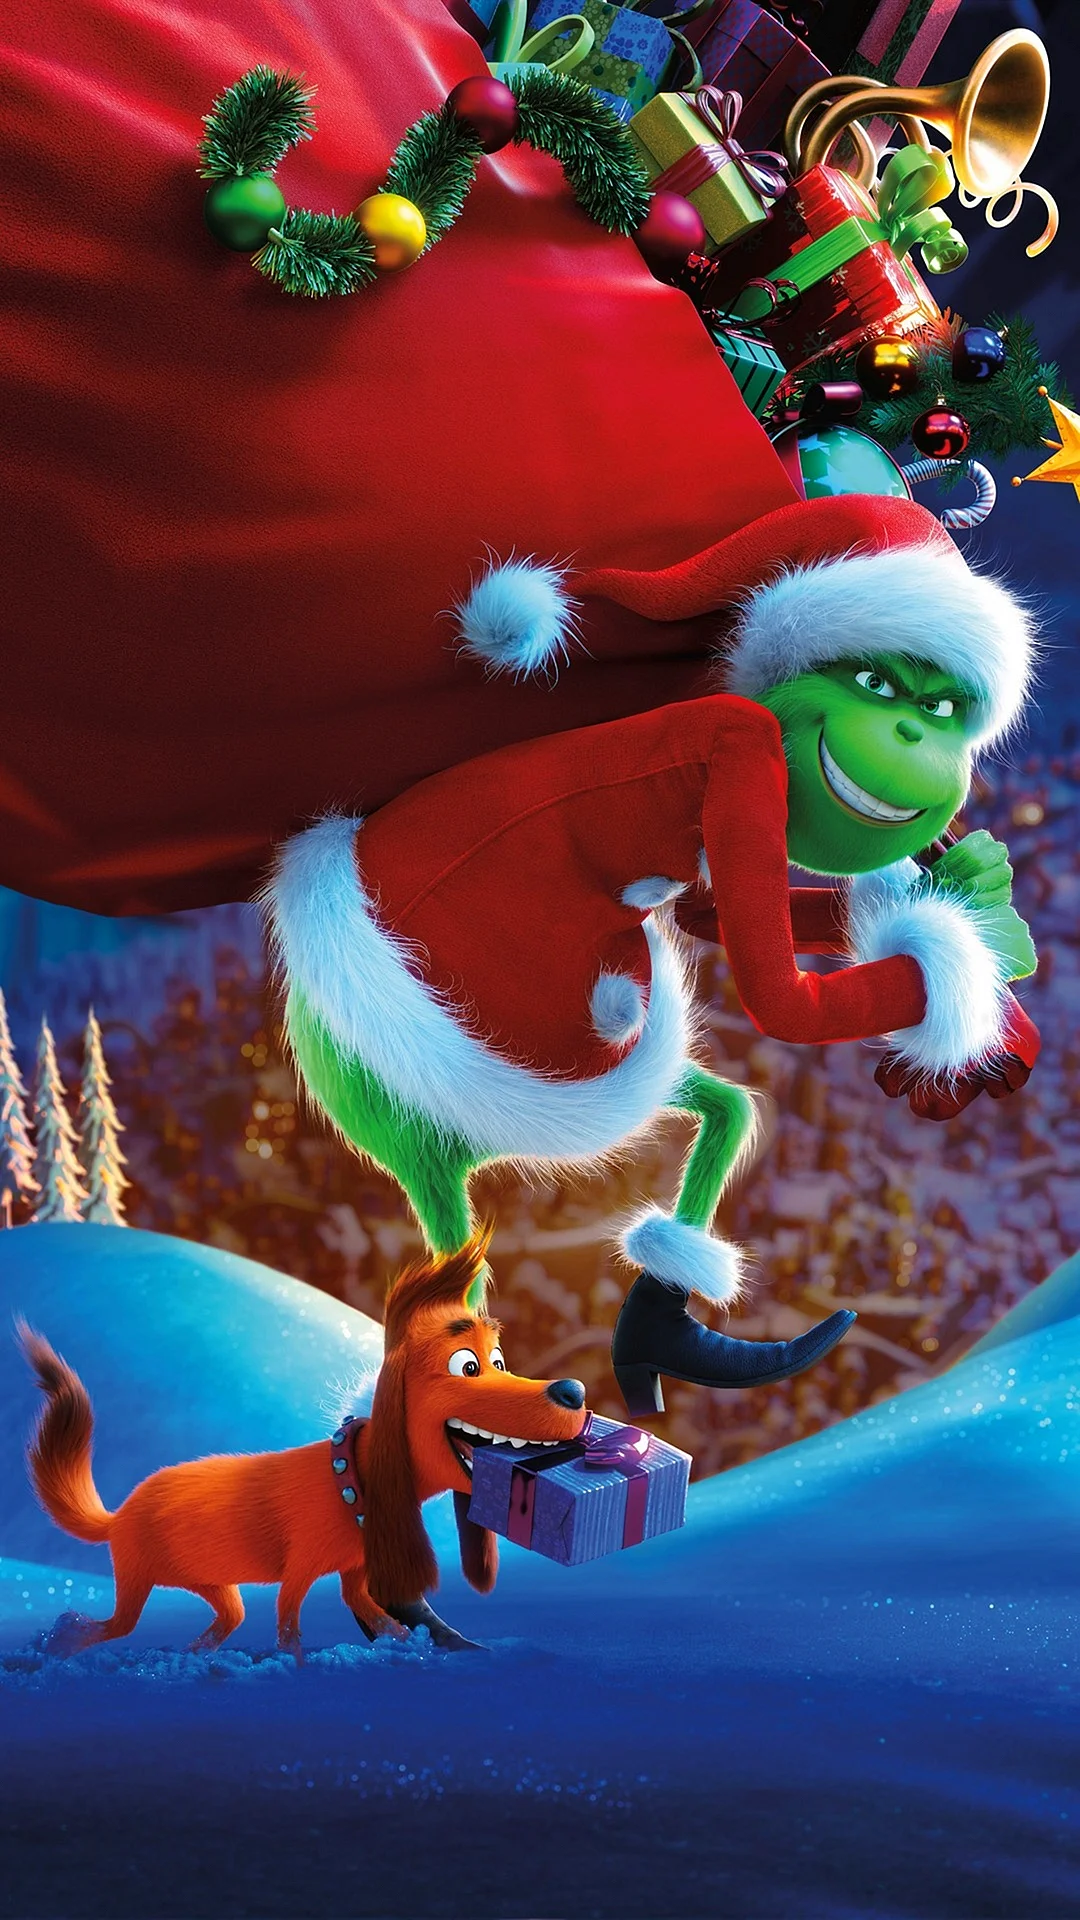 Elf Christmas Movie Wallpaper For iPhone